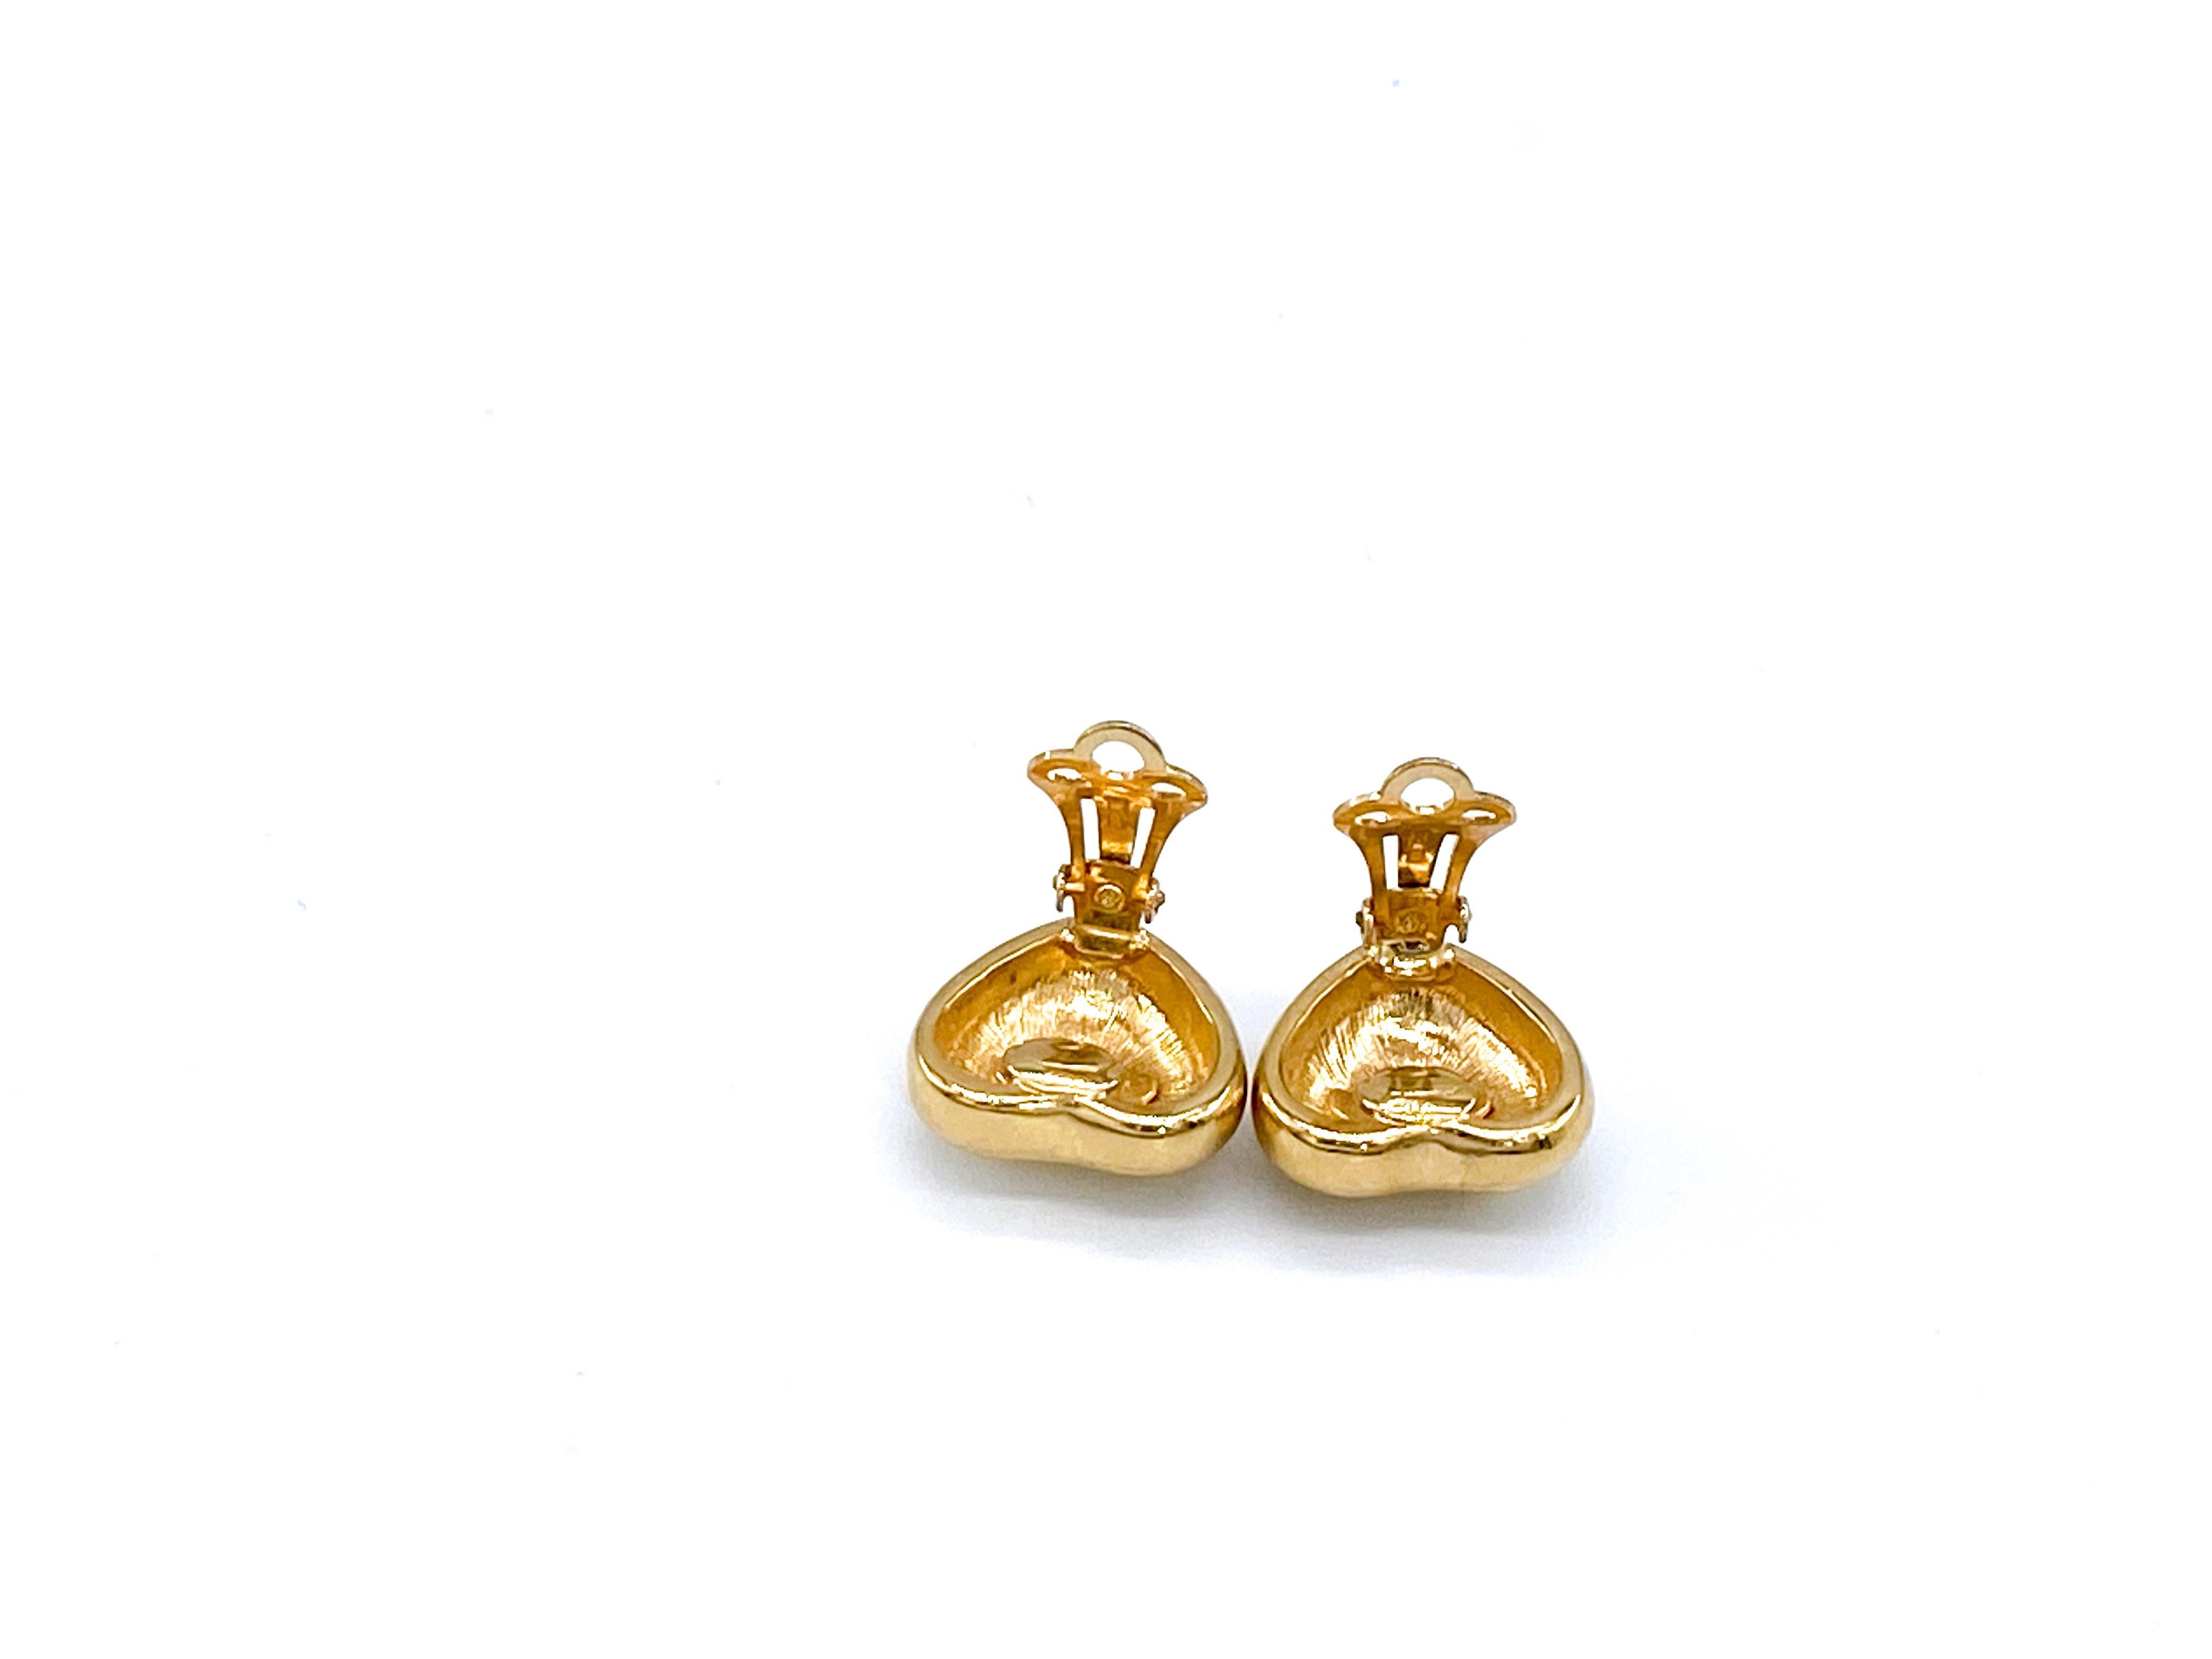 Valentino 1990s Vintage Clip On Earrings 

Timelessly elegant earrings with a playful 90s edge, these Valentino earrings will never go out of style

Detail
-Made in Italy in the 1990s
-Cast from gold plated metal  
-Feature the iconic Valentino 'V'